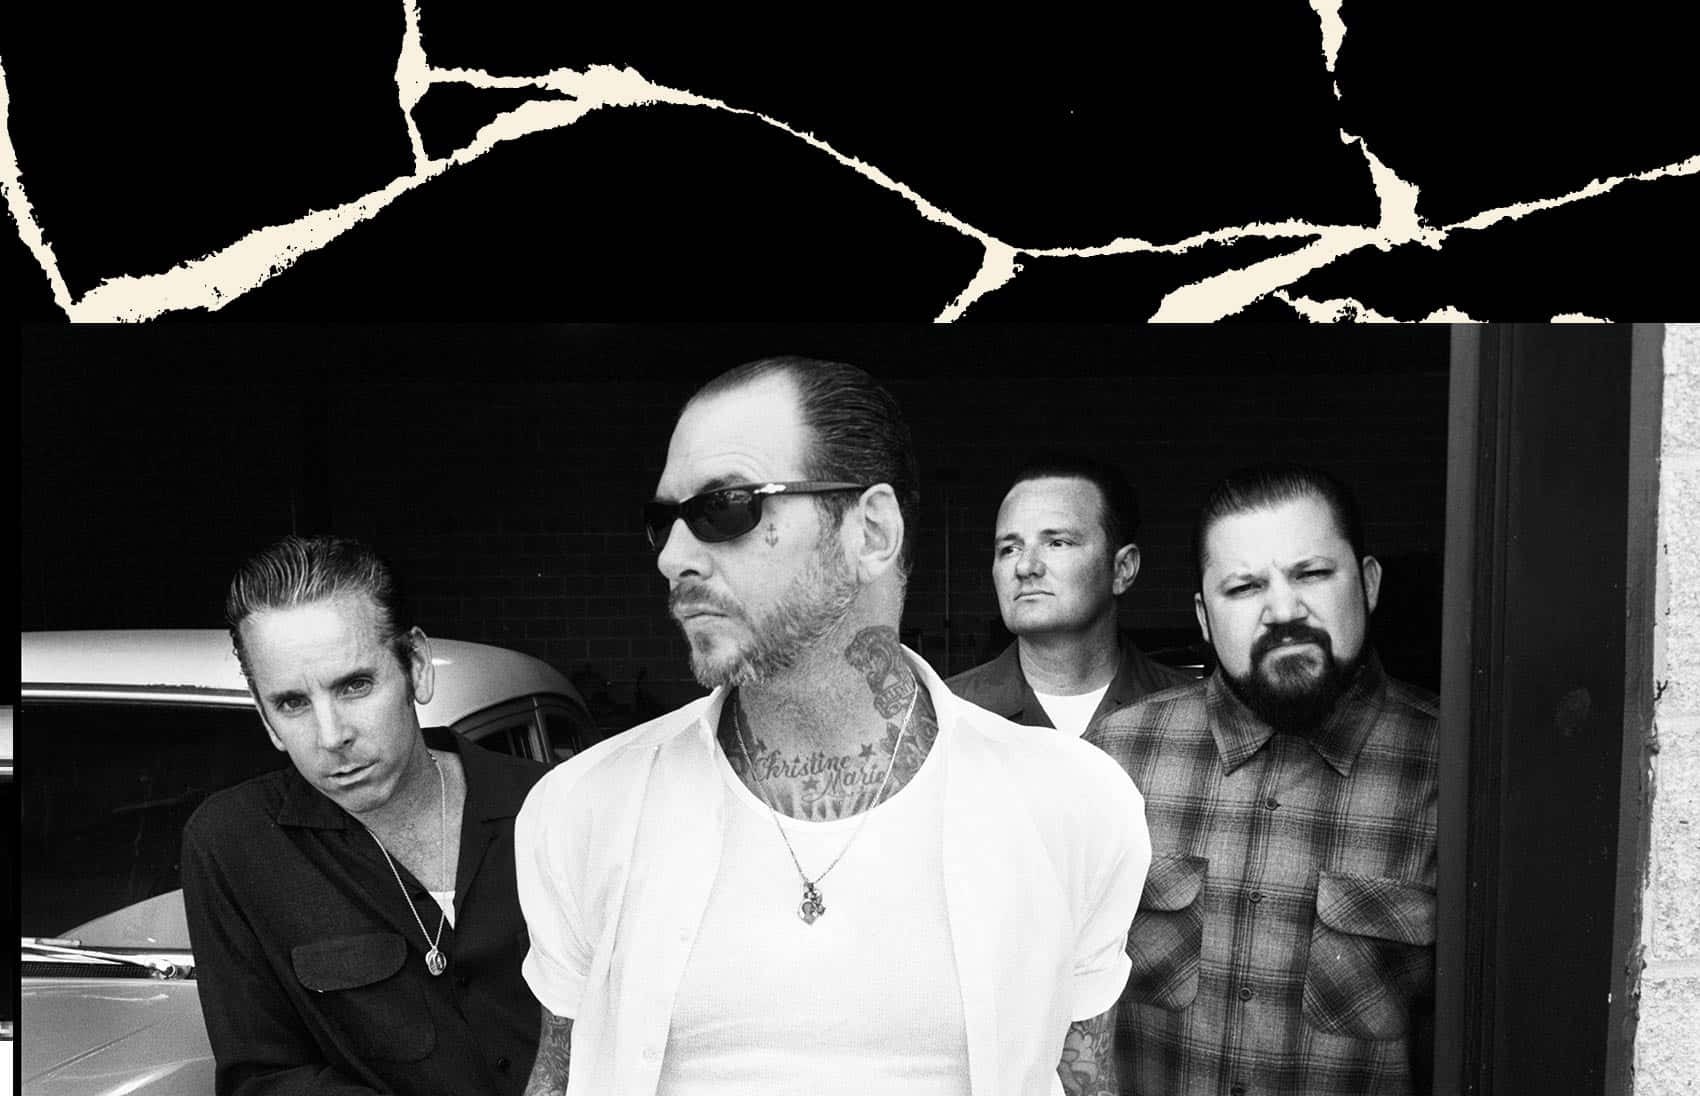 Social Distortion 4 Piece Band Background